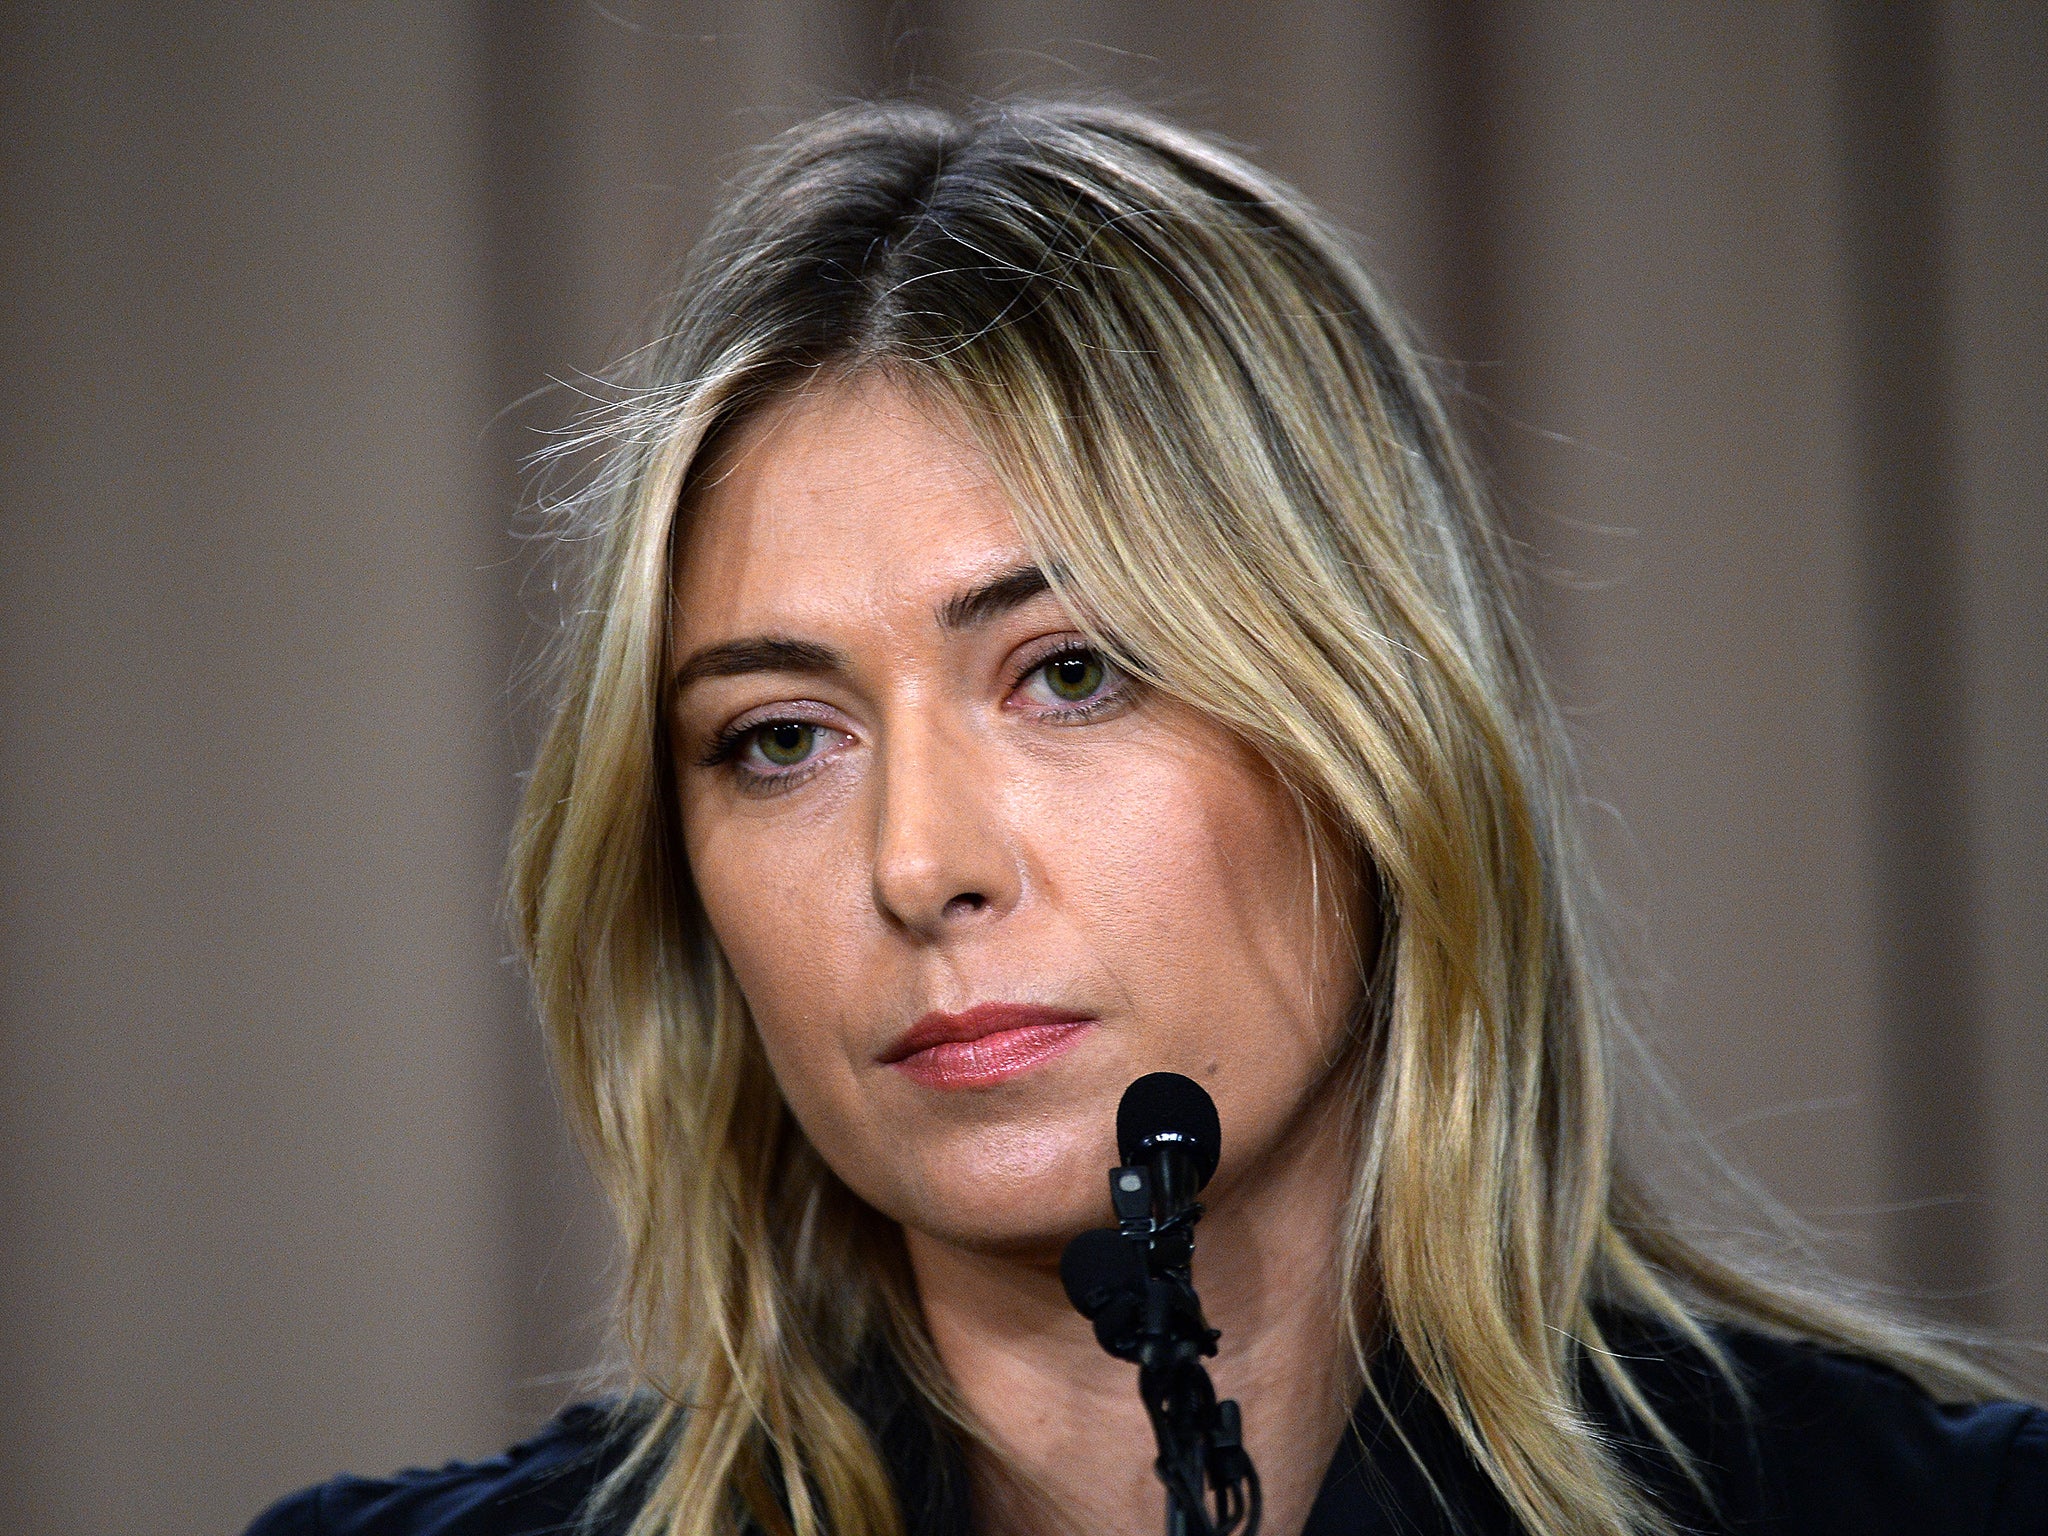 &#13;
Sharapova admitted using meldonium in a press conference in March &#13;